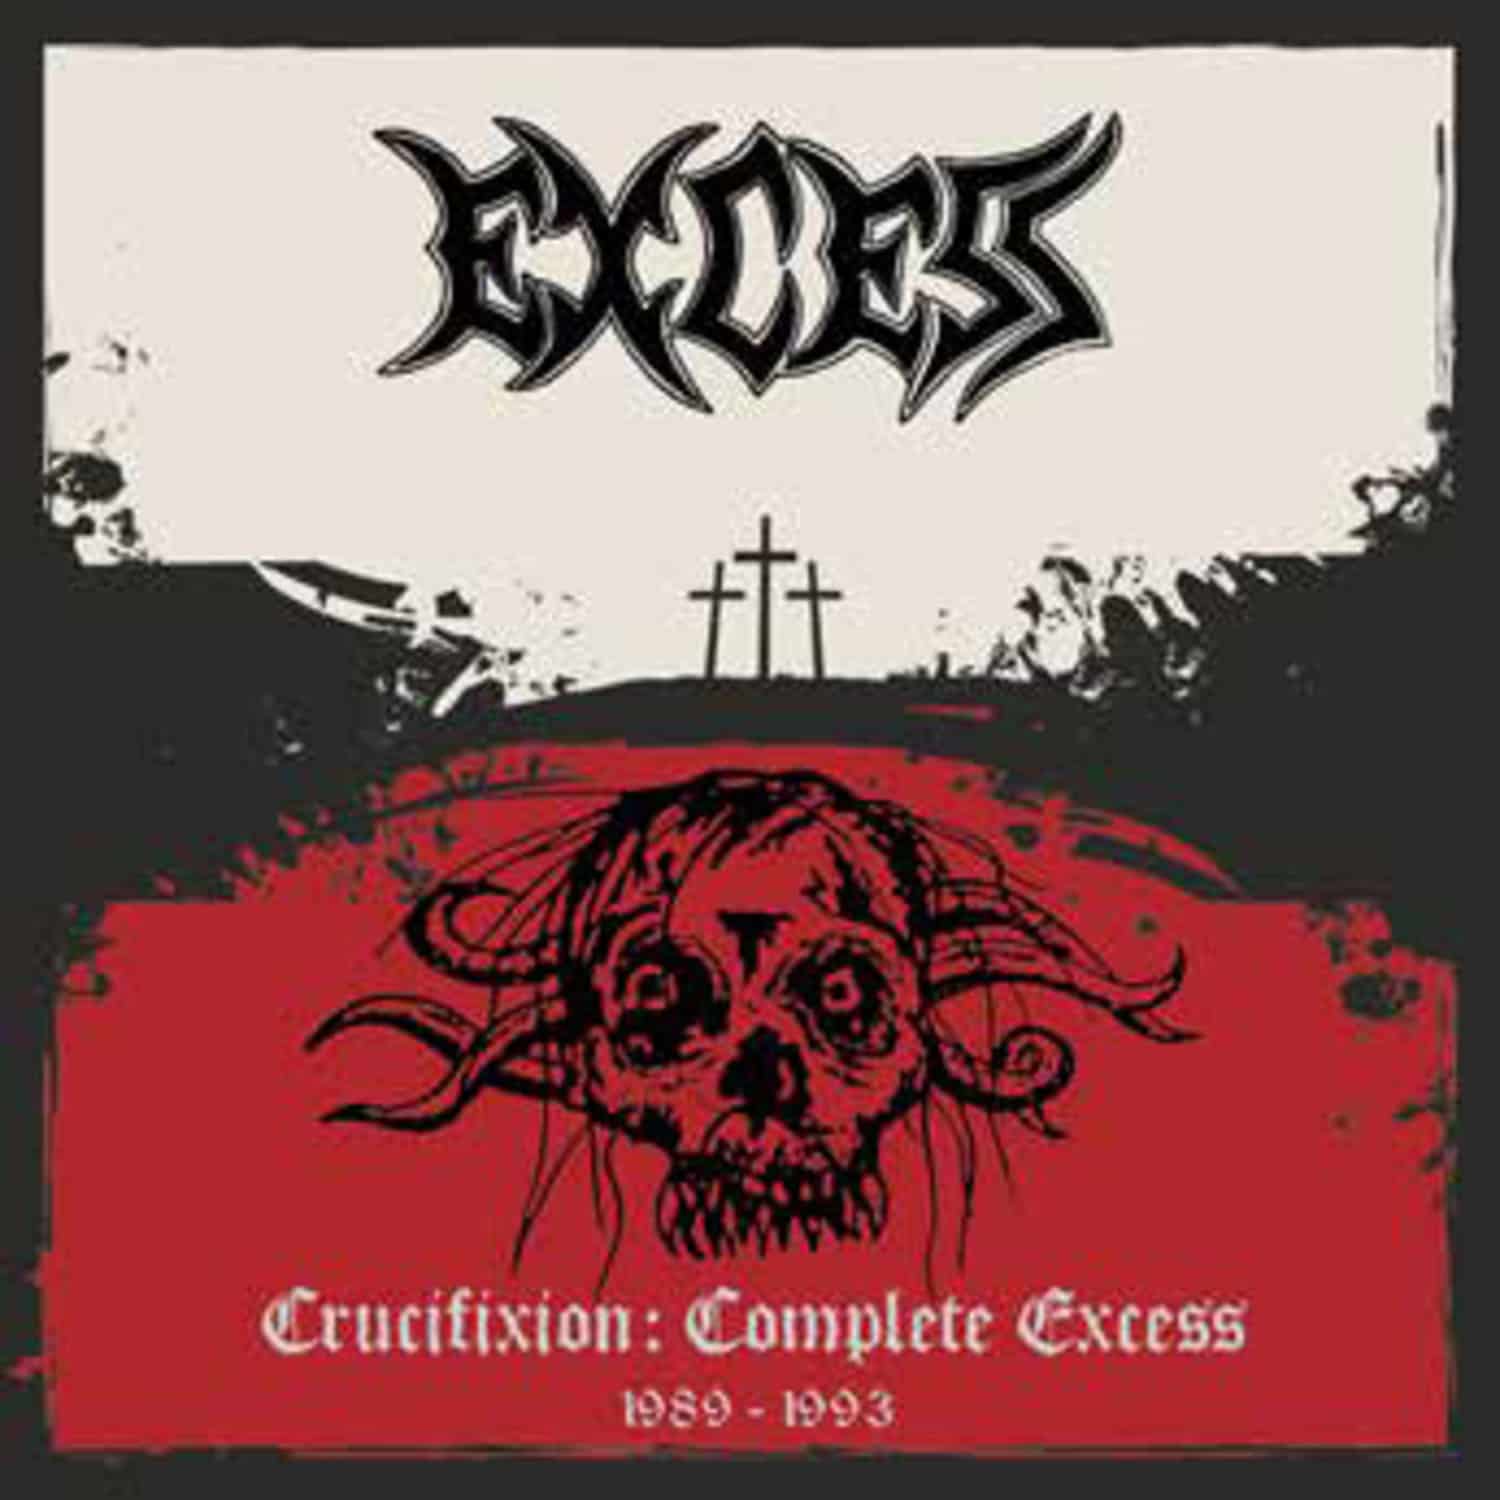 Excess - CRUCIFIXION-COMPLETE EXCESS 